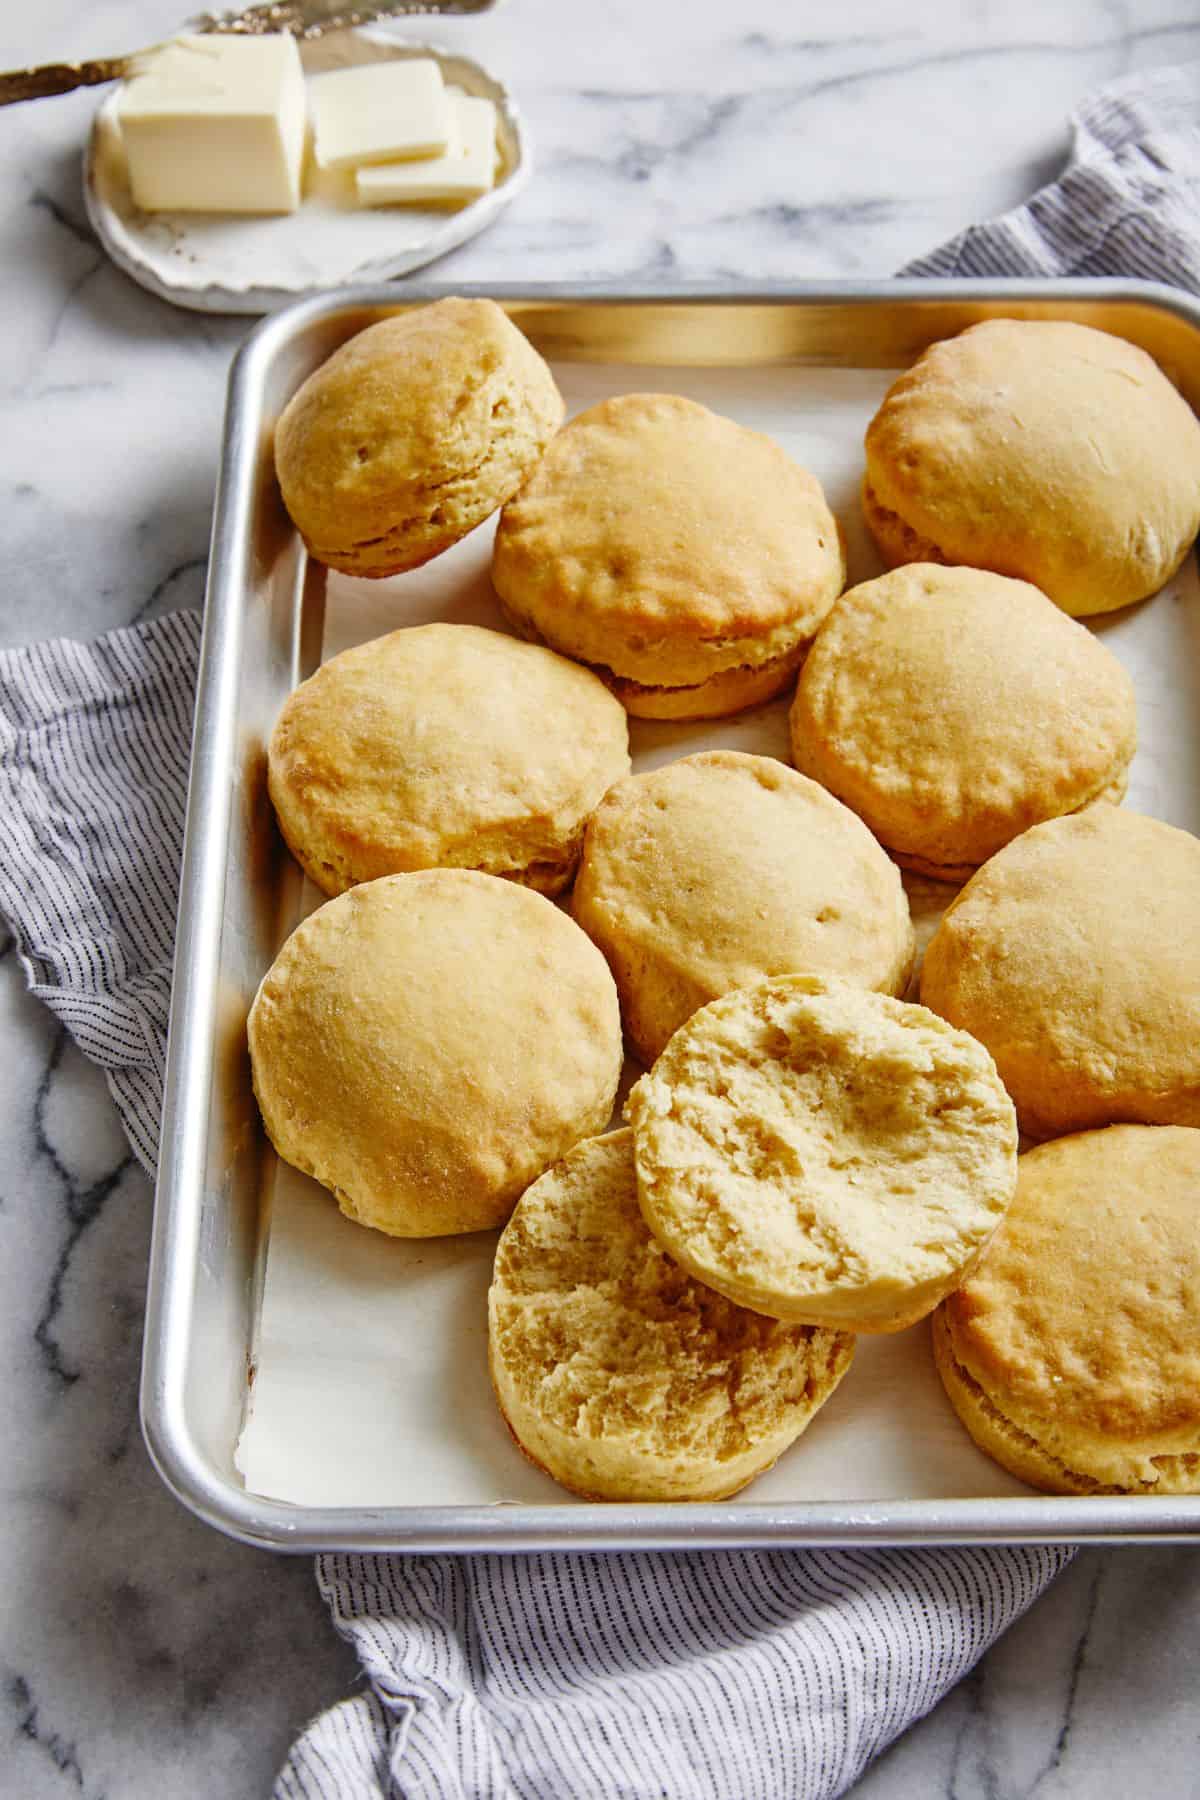 Buttermilk biscuits on a sheet pan with one biscuit cut open in half